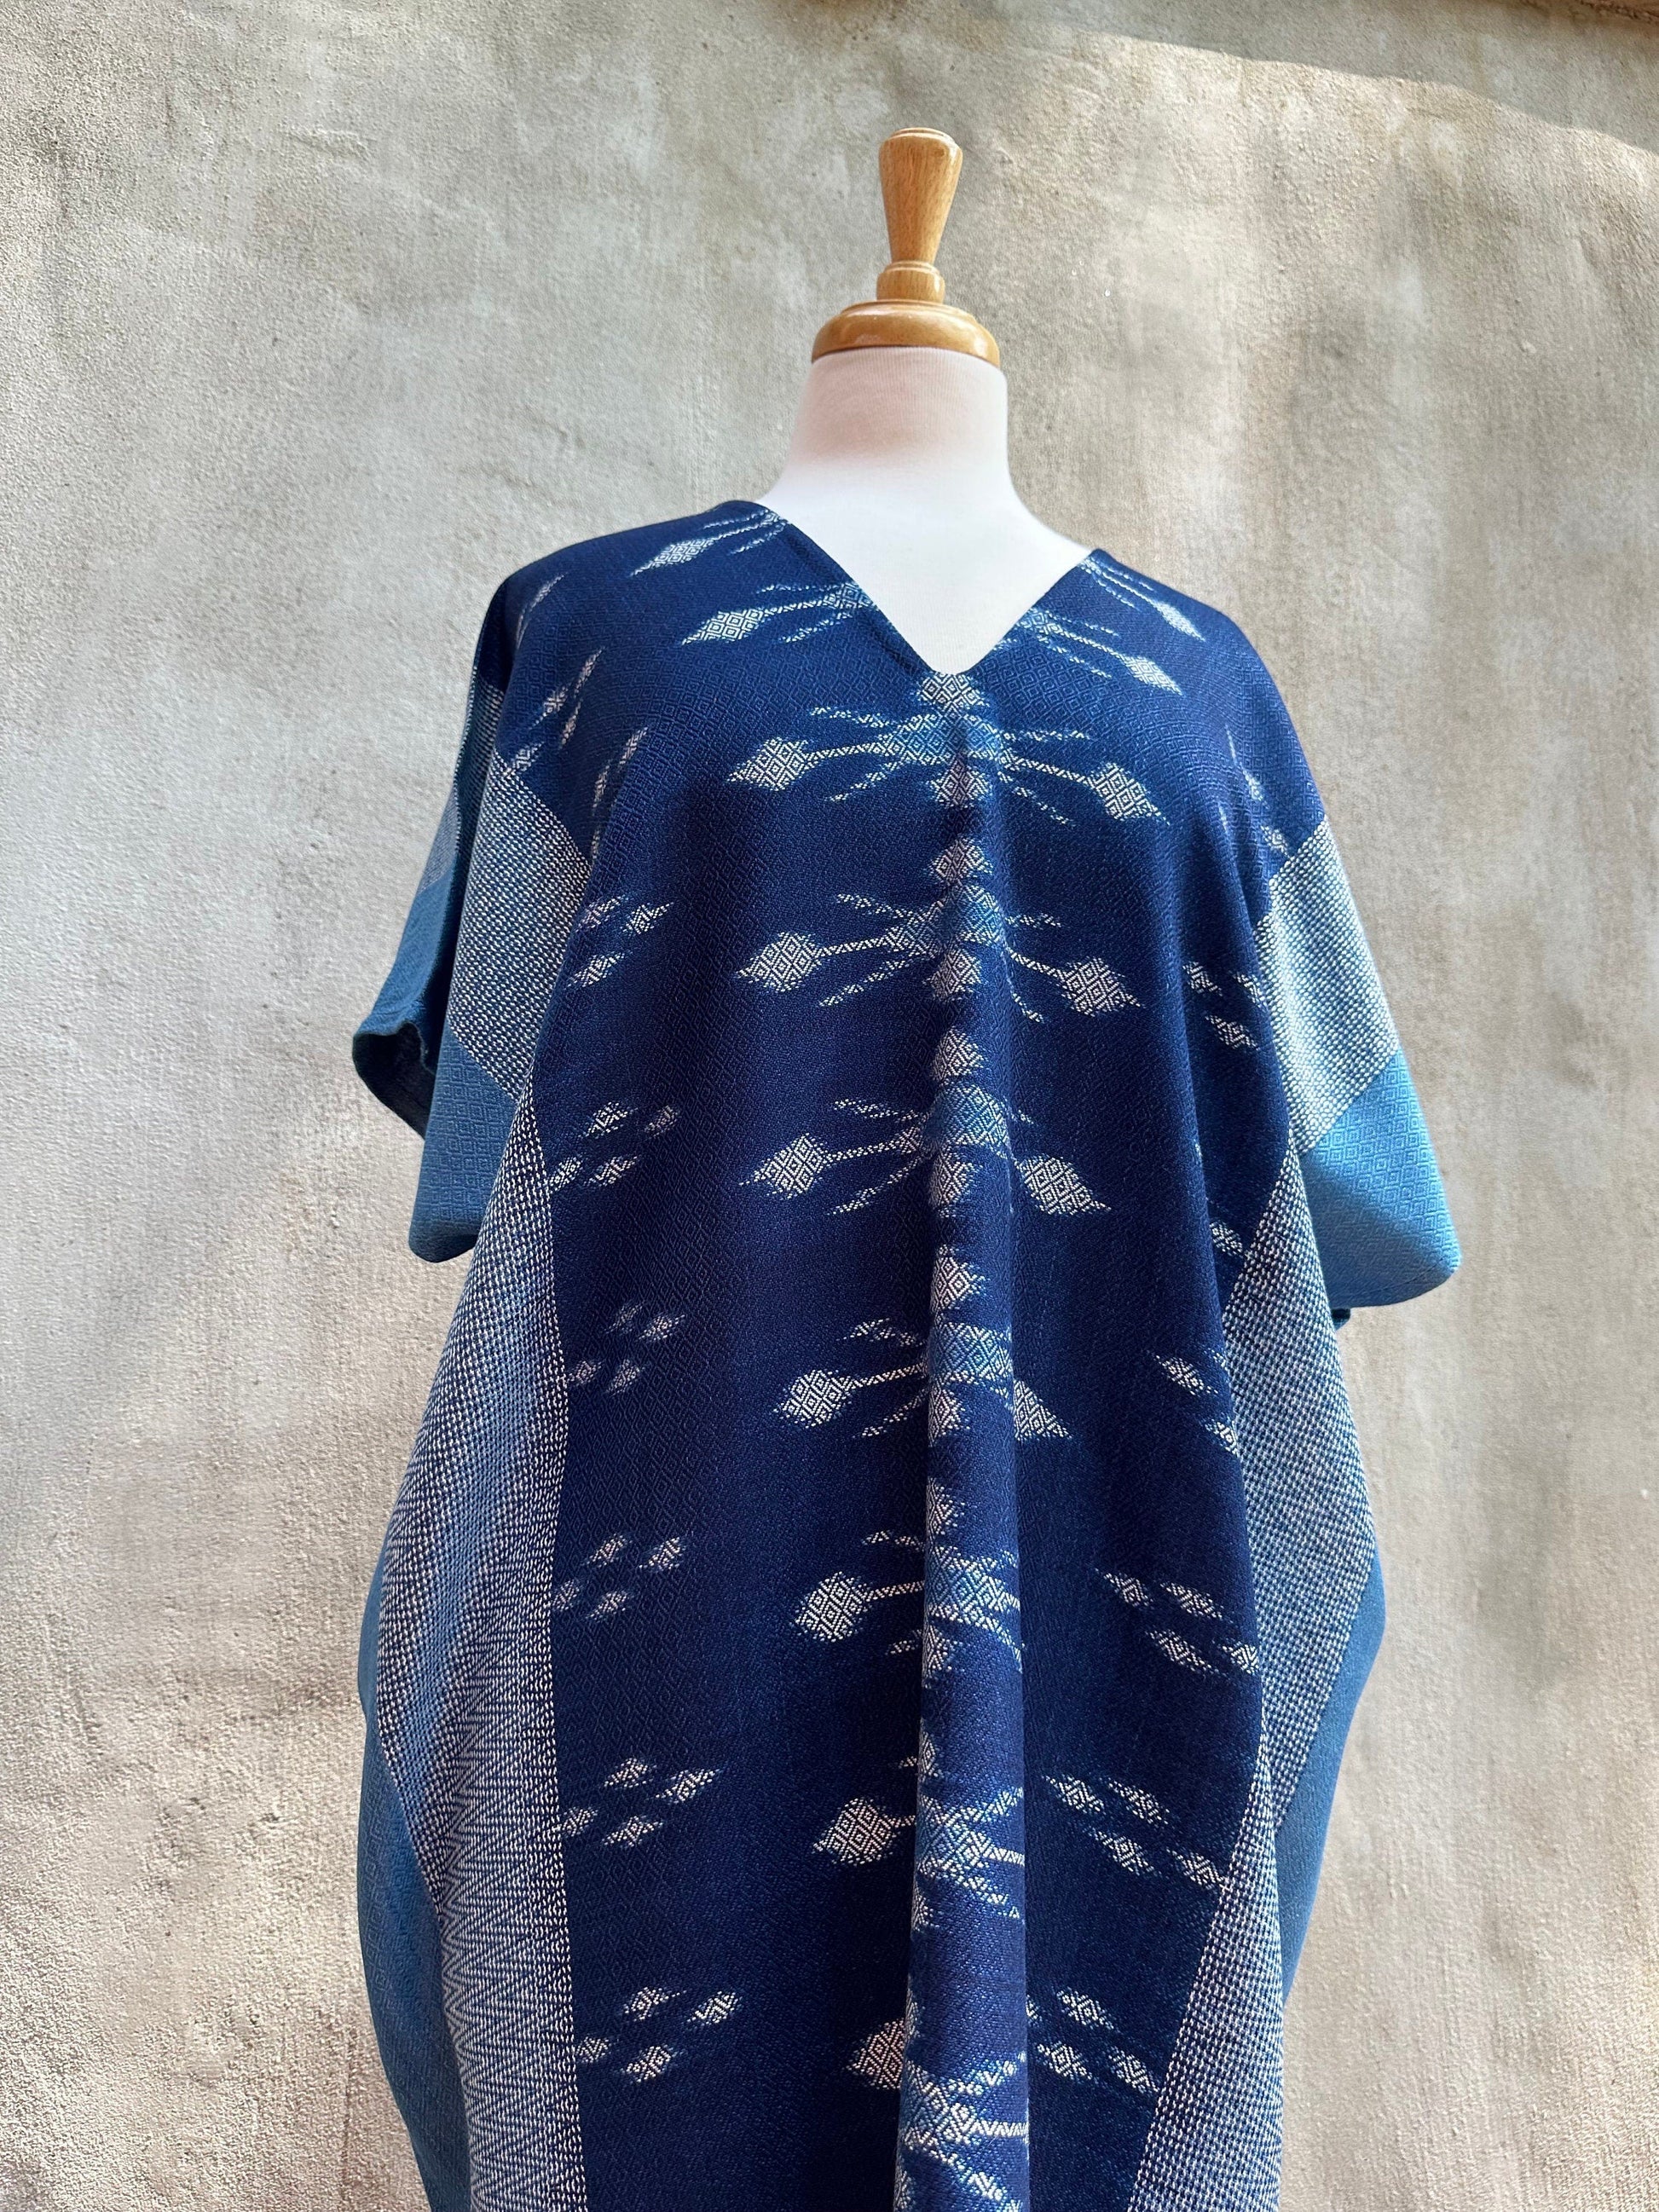 MALA handworks  Ikat Hand Woven Pattern Kaftan in Indigo Blue with Light Blue and White